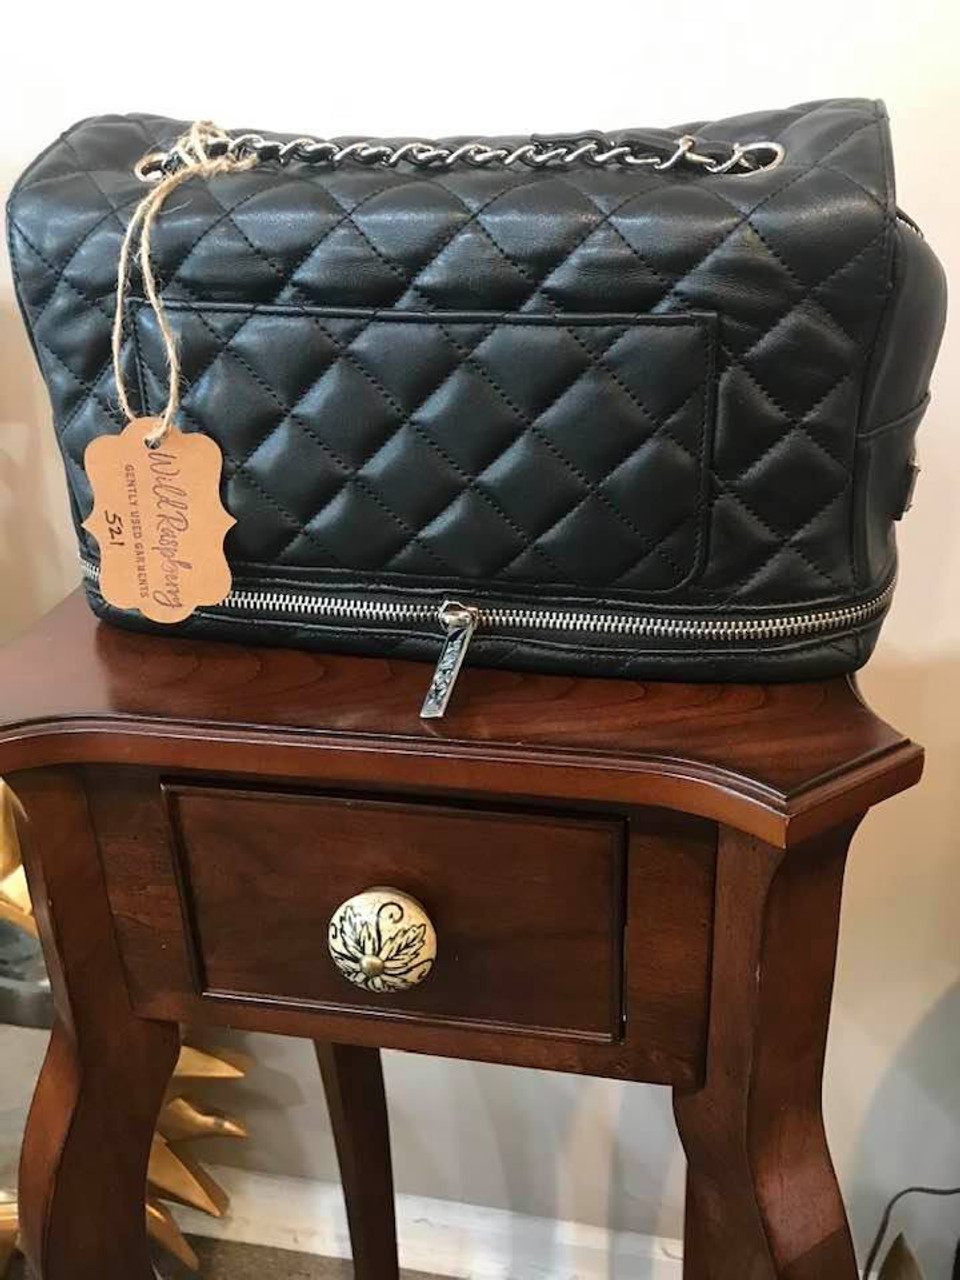 Chanel Raspberry Quilted Calfskin Small Gabrielle Backpack